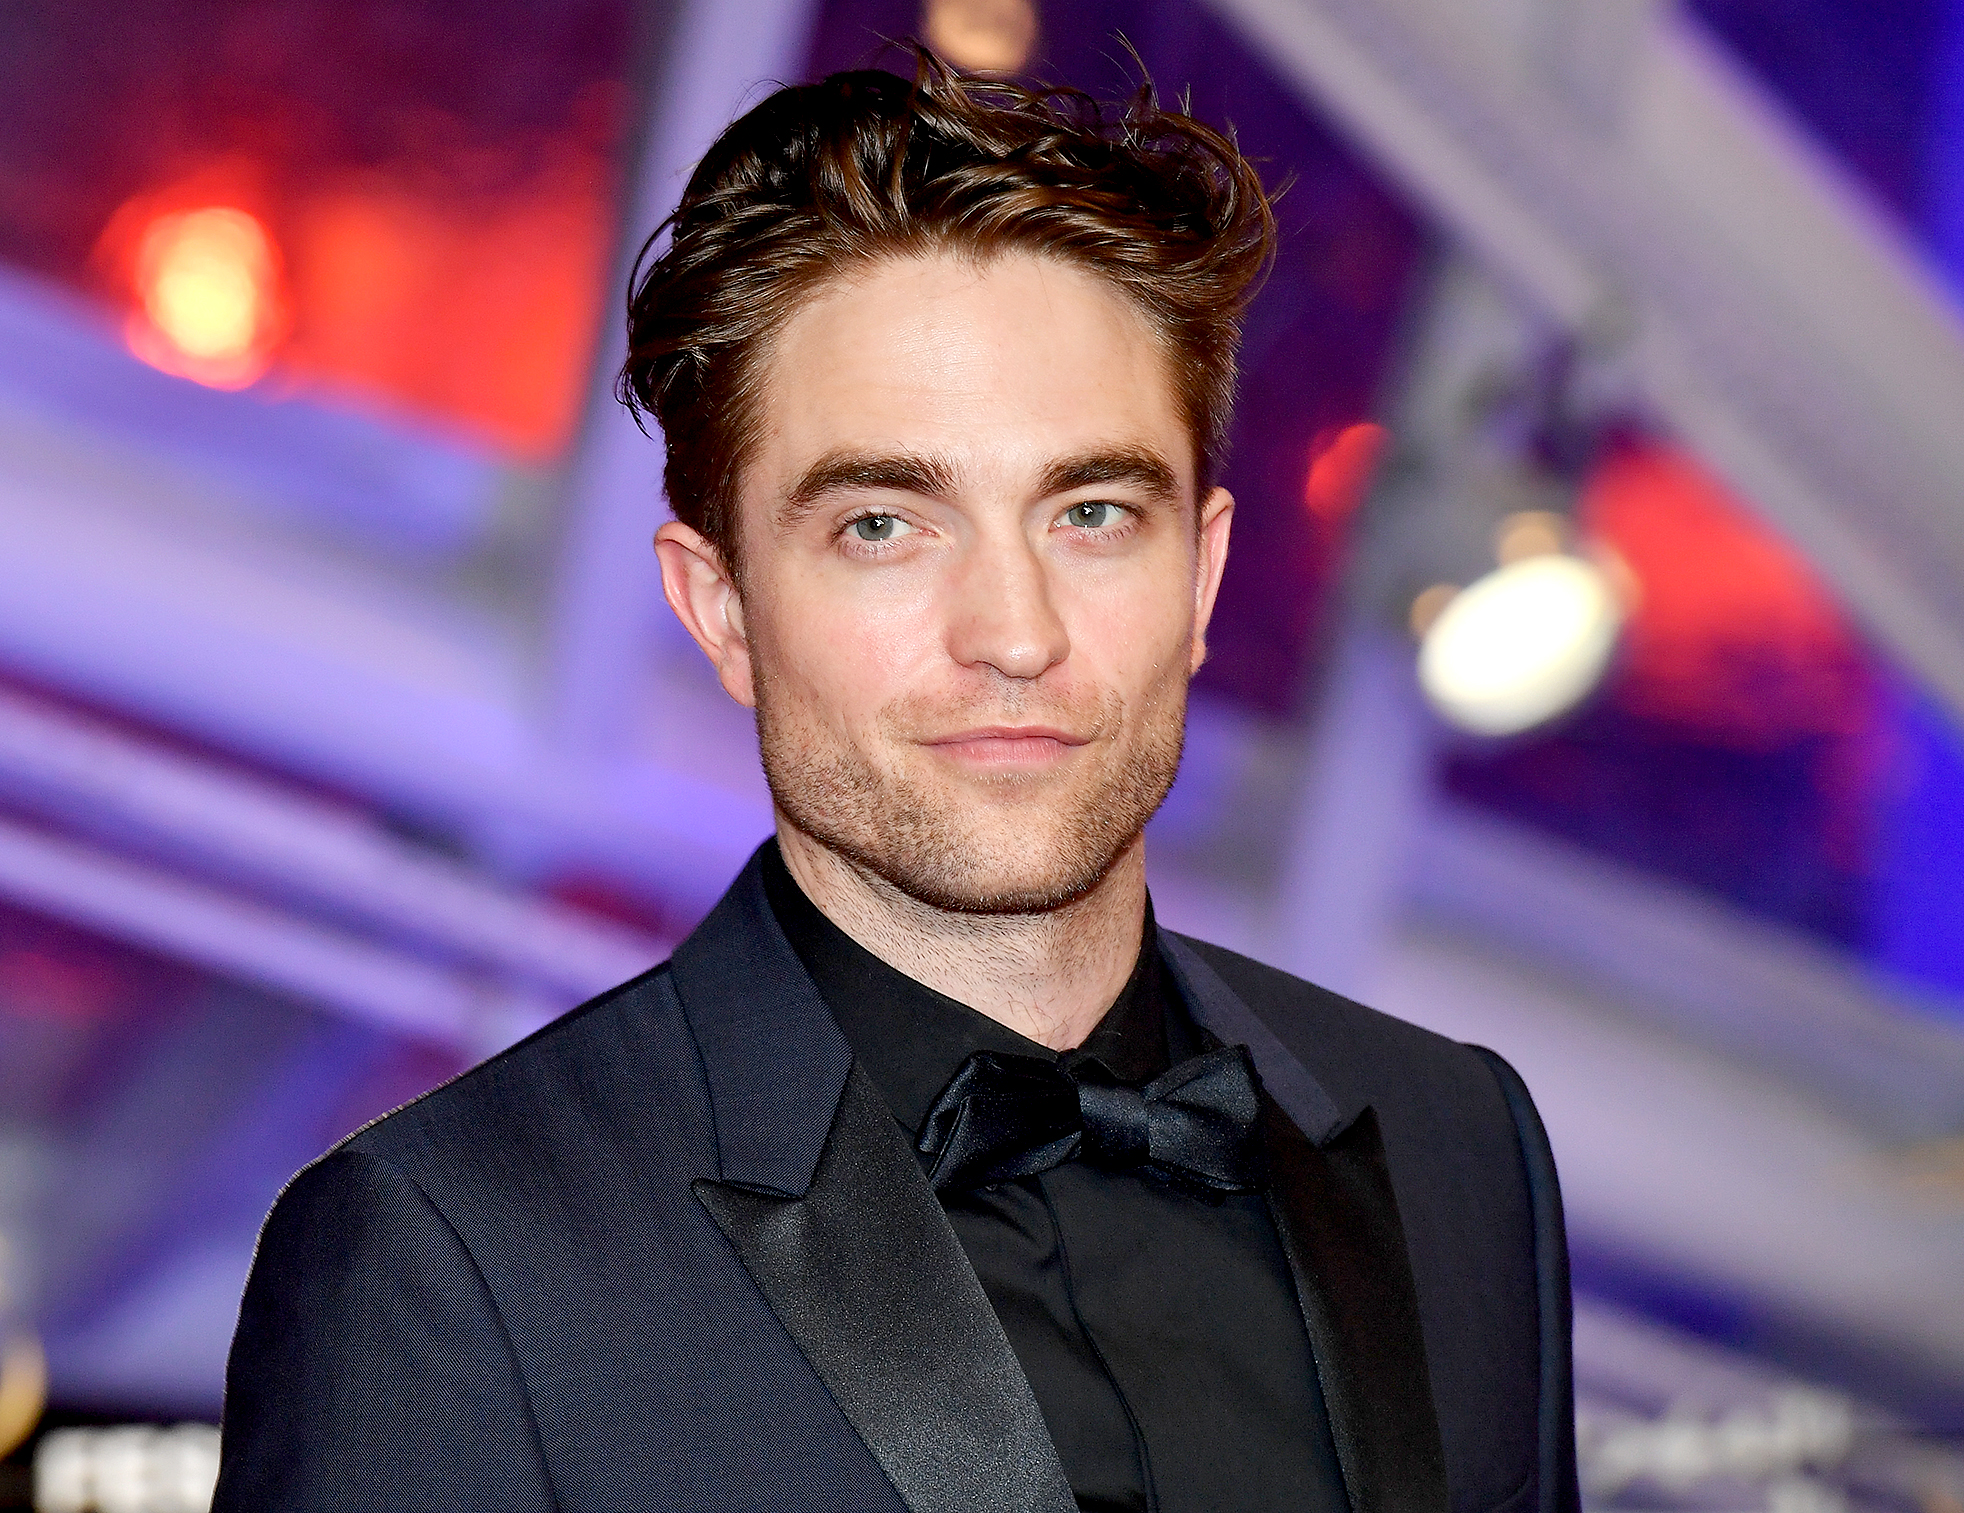 Robert Pattinson Rewatched ‘Twilight’ and Has New Thoughts1964 x 1513